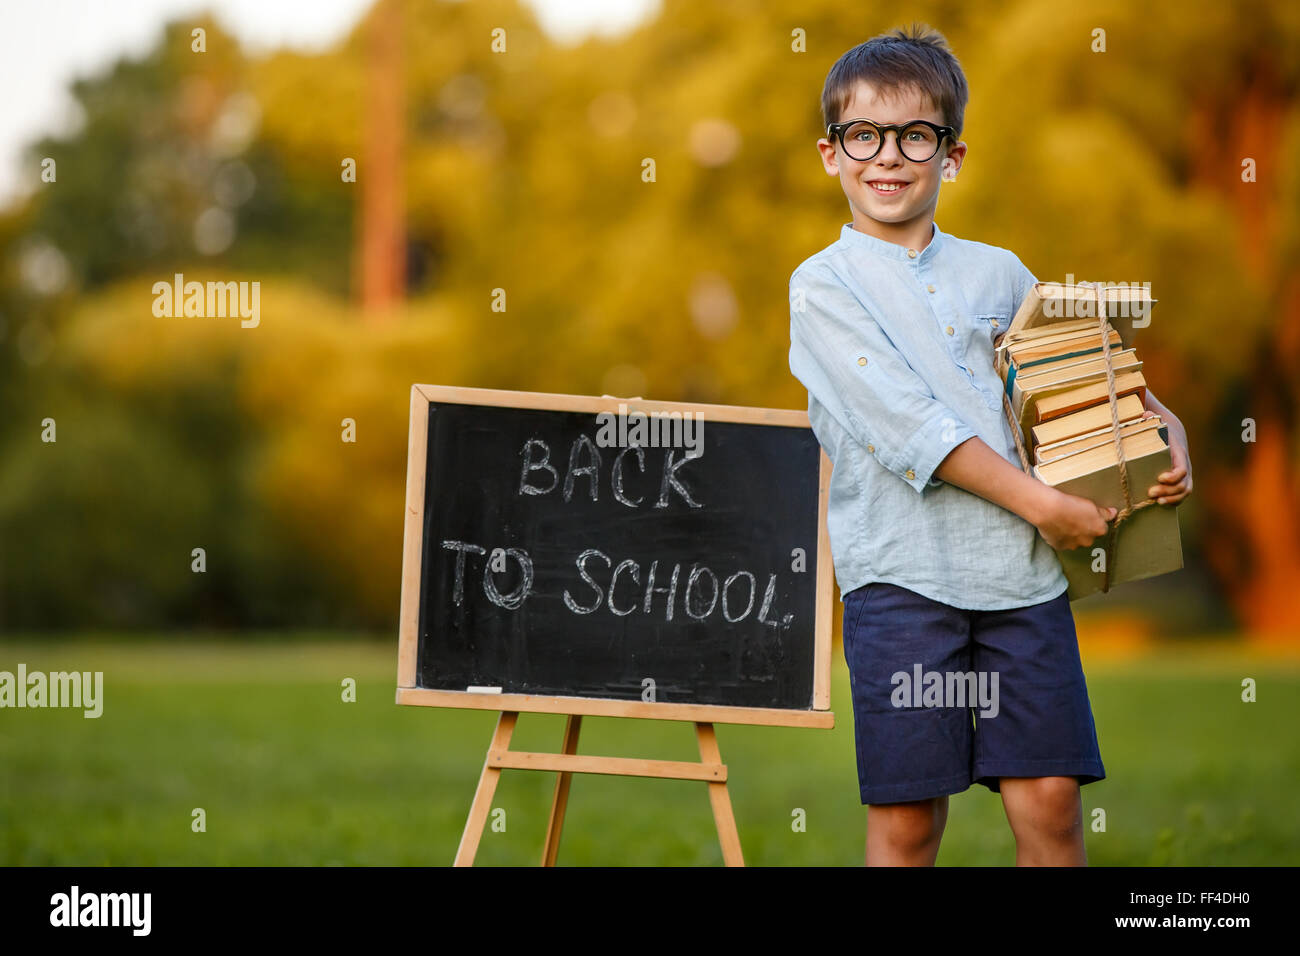 Cute little schoolboy carrying a stack of books Stock Photo